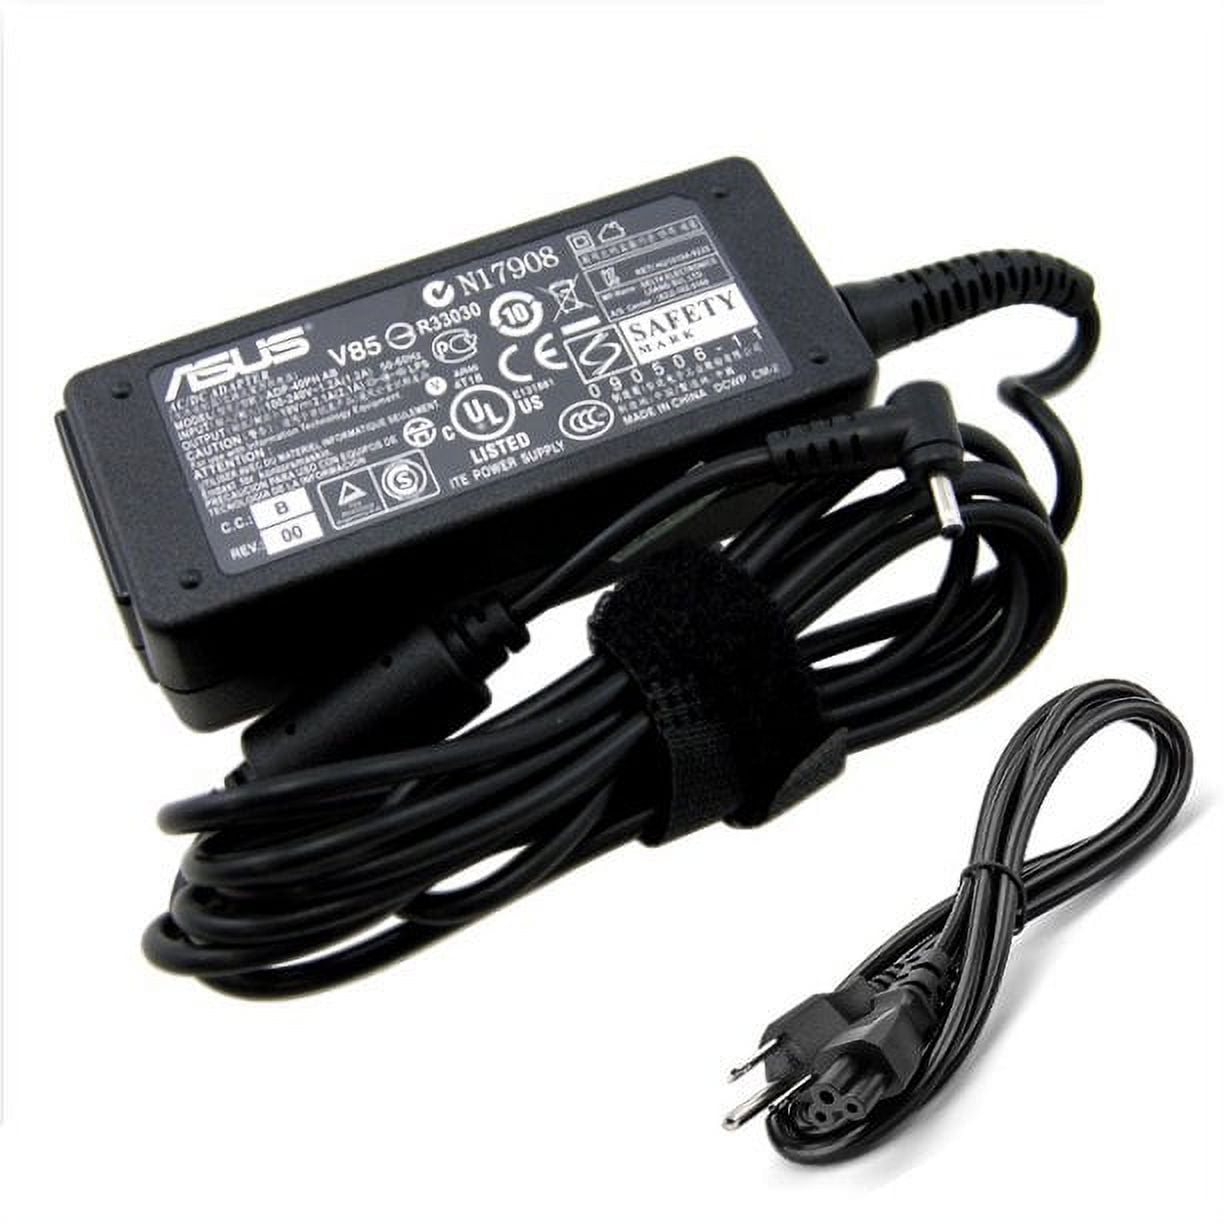 ASUS ADP-40PH Chargeurs pour Asus Eee PC 1001 1001P 1005 1005HA 1005HAB  1201 AD6630 ADP-40PH AB AC Adapter